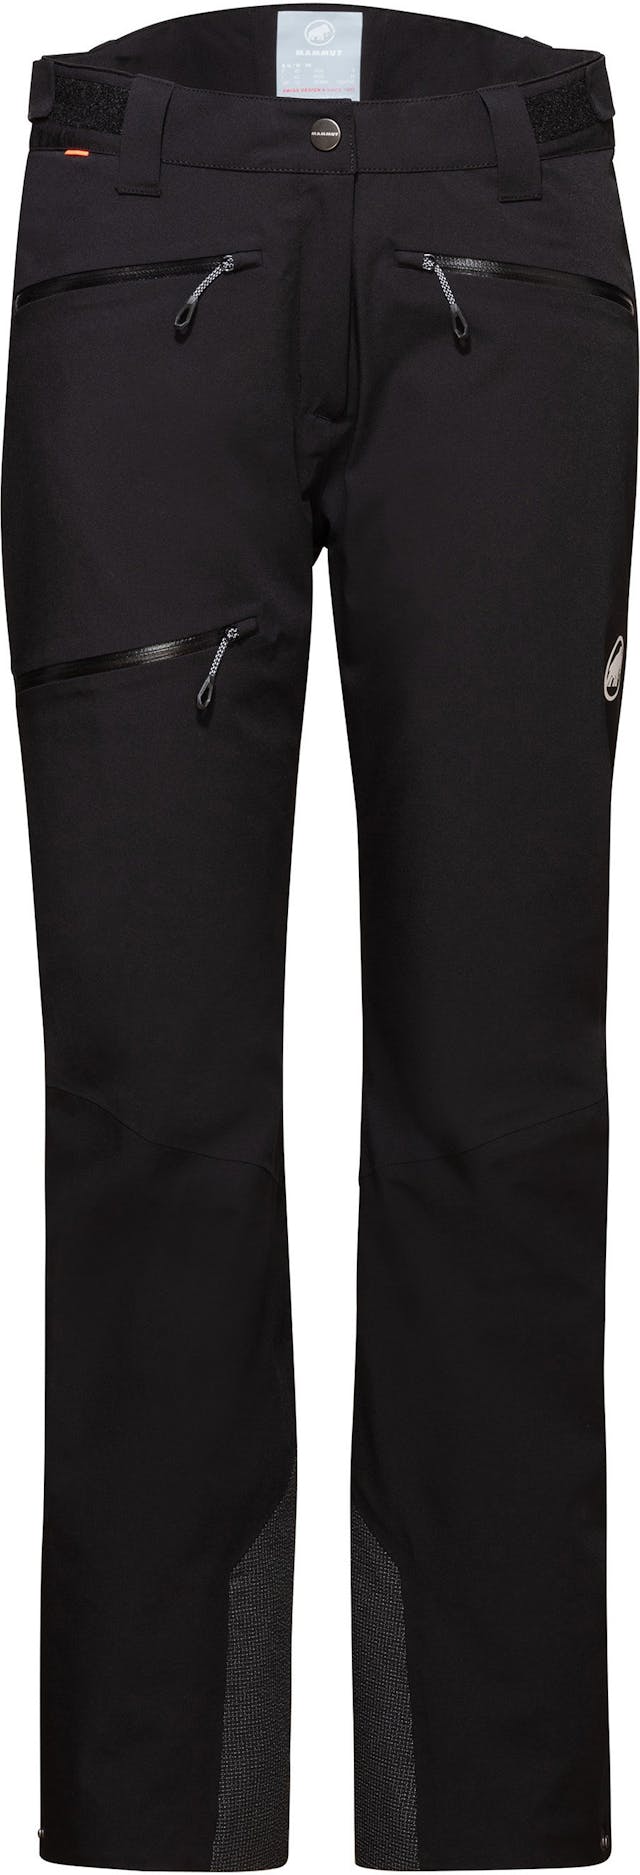 Product image for Stoney HS Thermo Pants - Women's